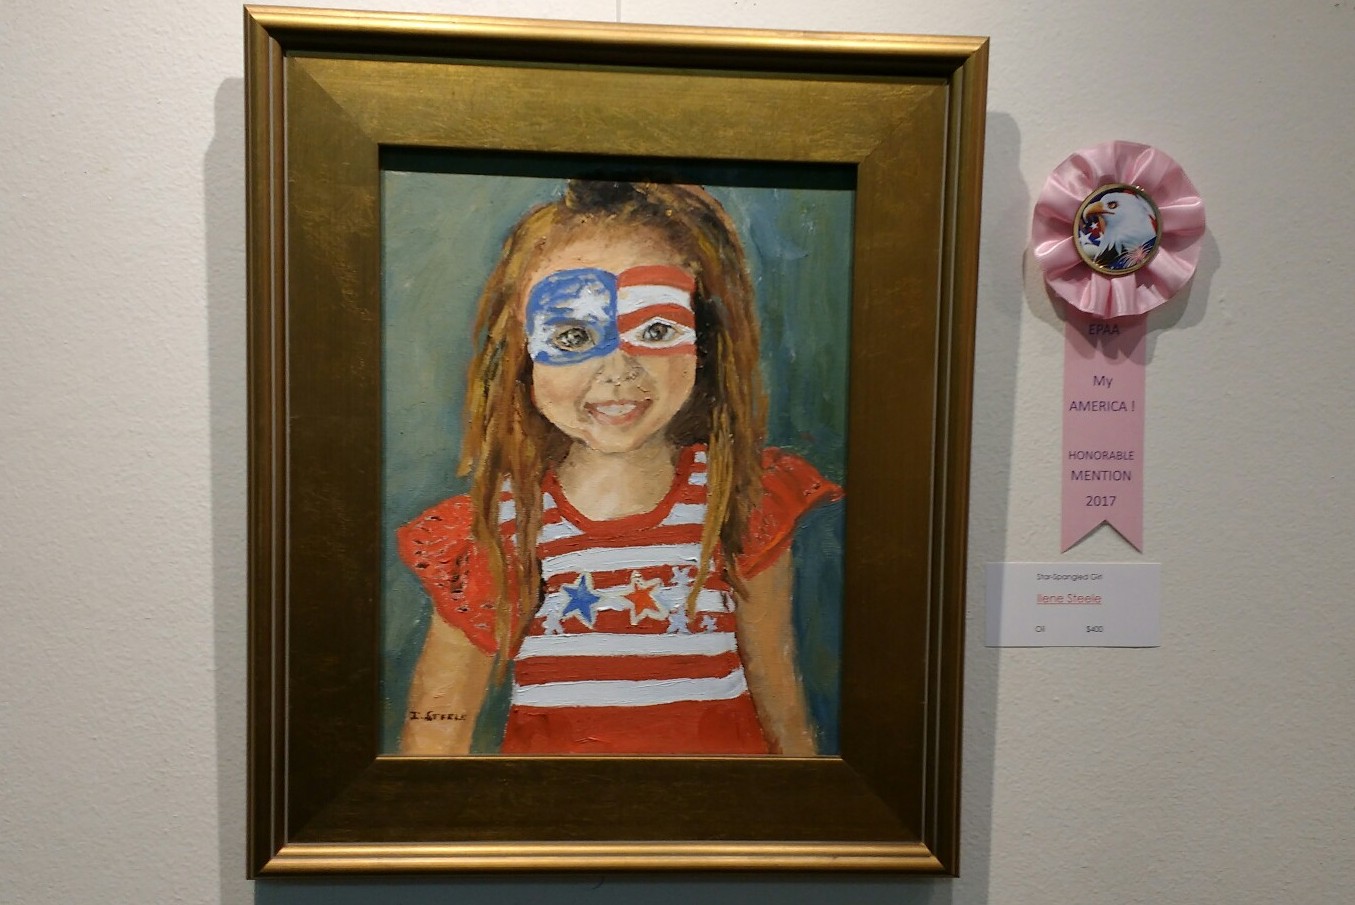 Star Spangled Girl by Ilene Steele.  Honorable mention